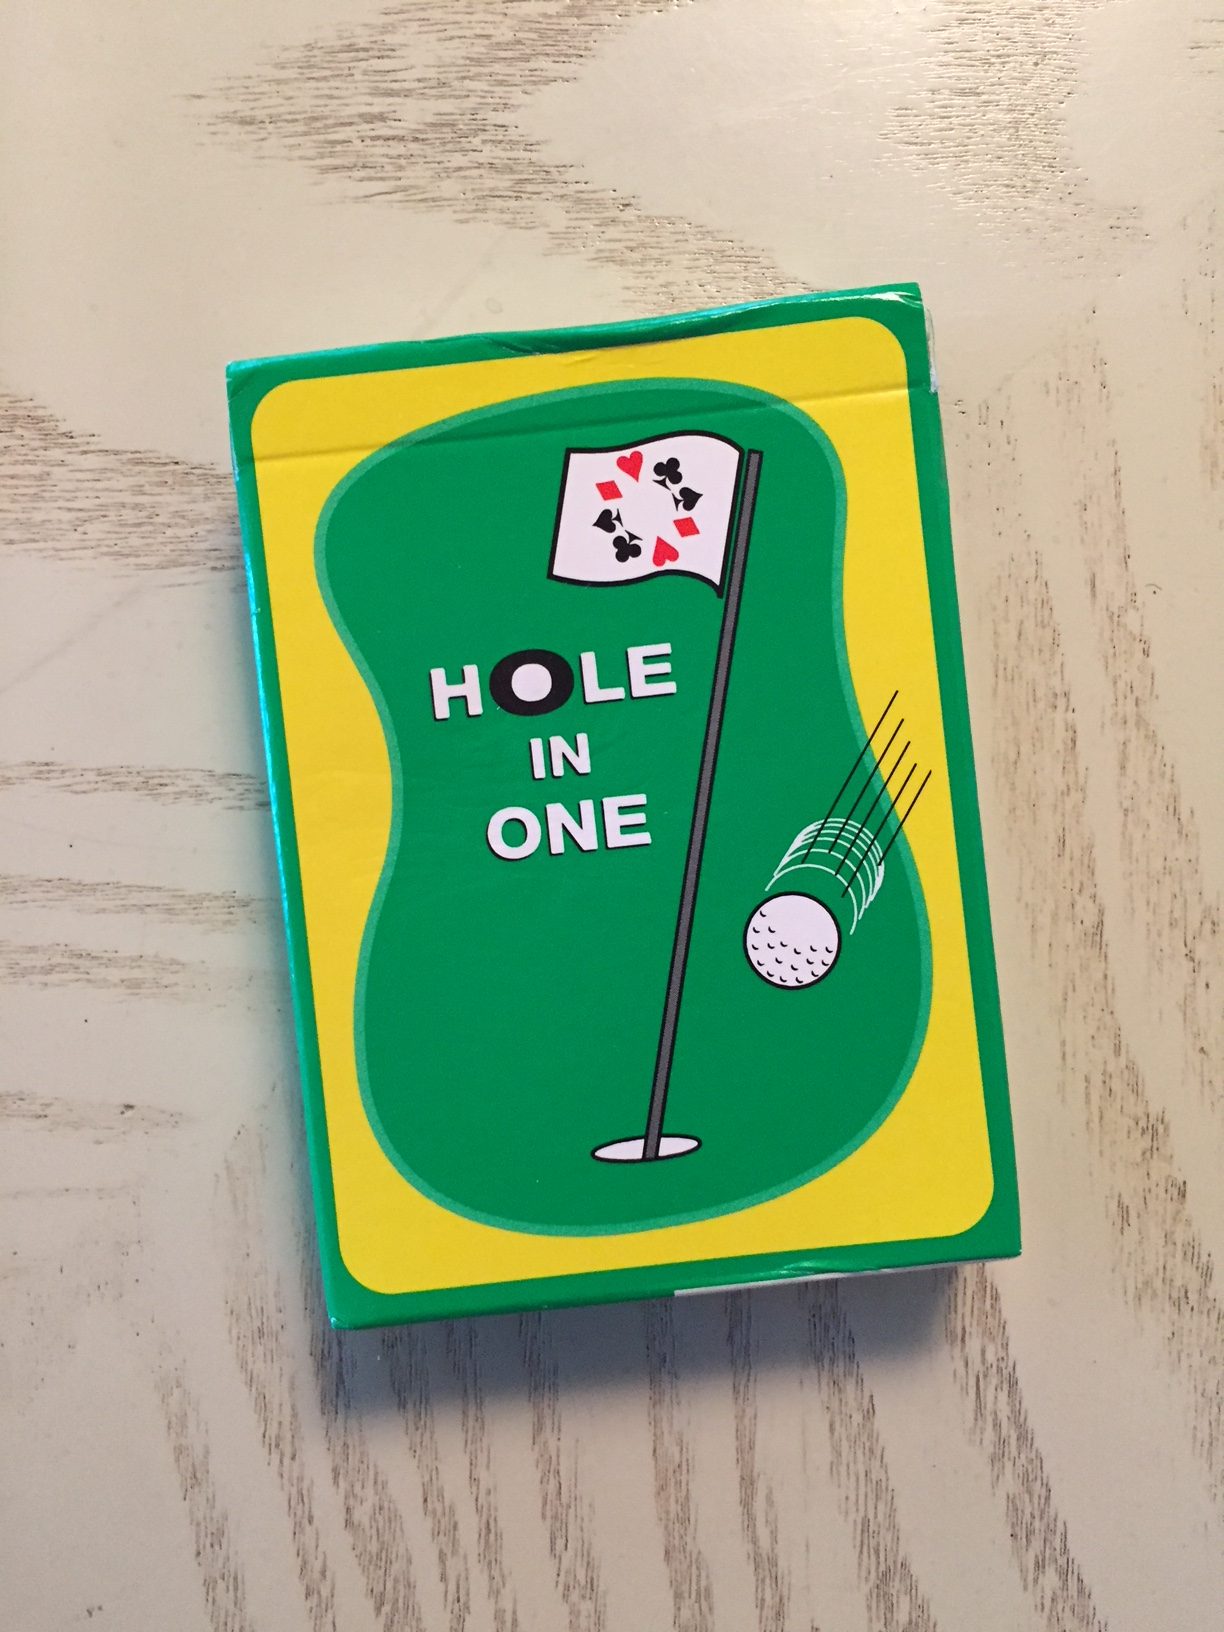 card game of golf instrustions